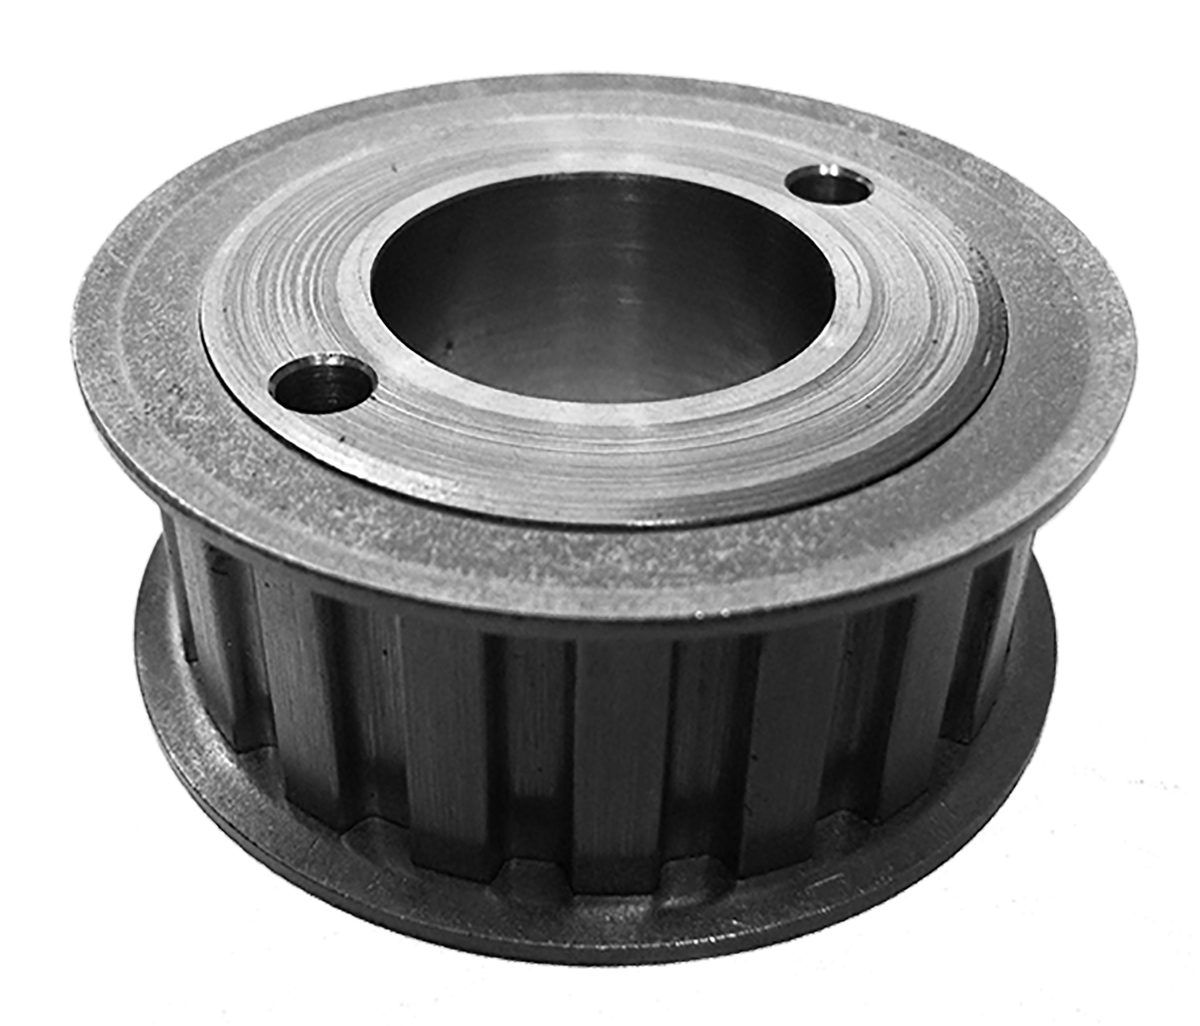 84LH075 - Cast Iron Imperial Pitch Pulleys